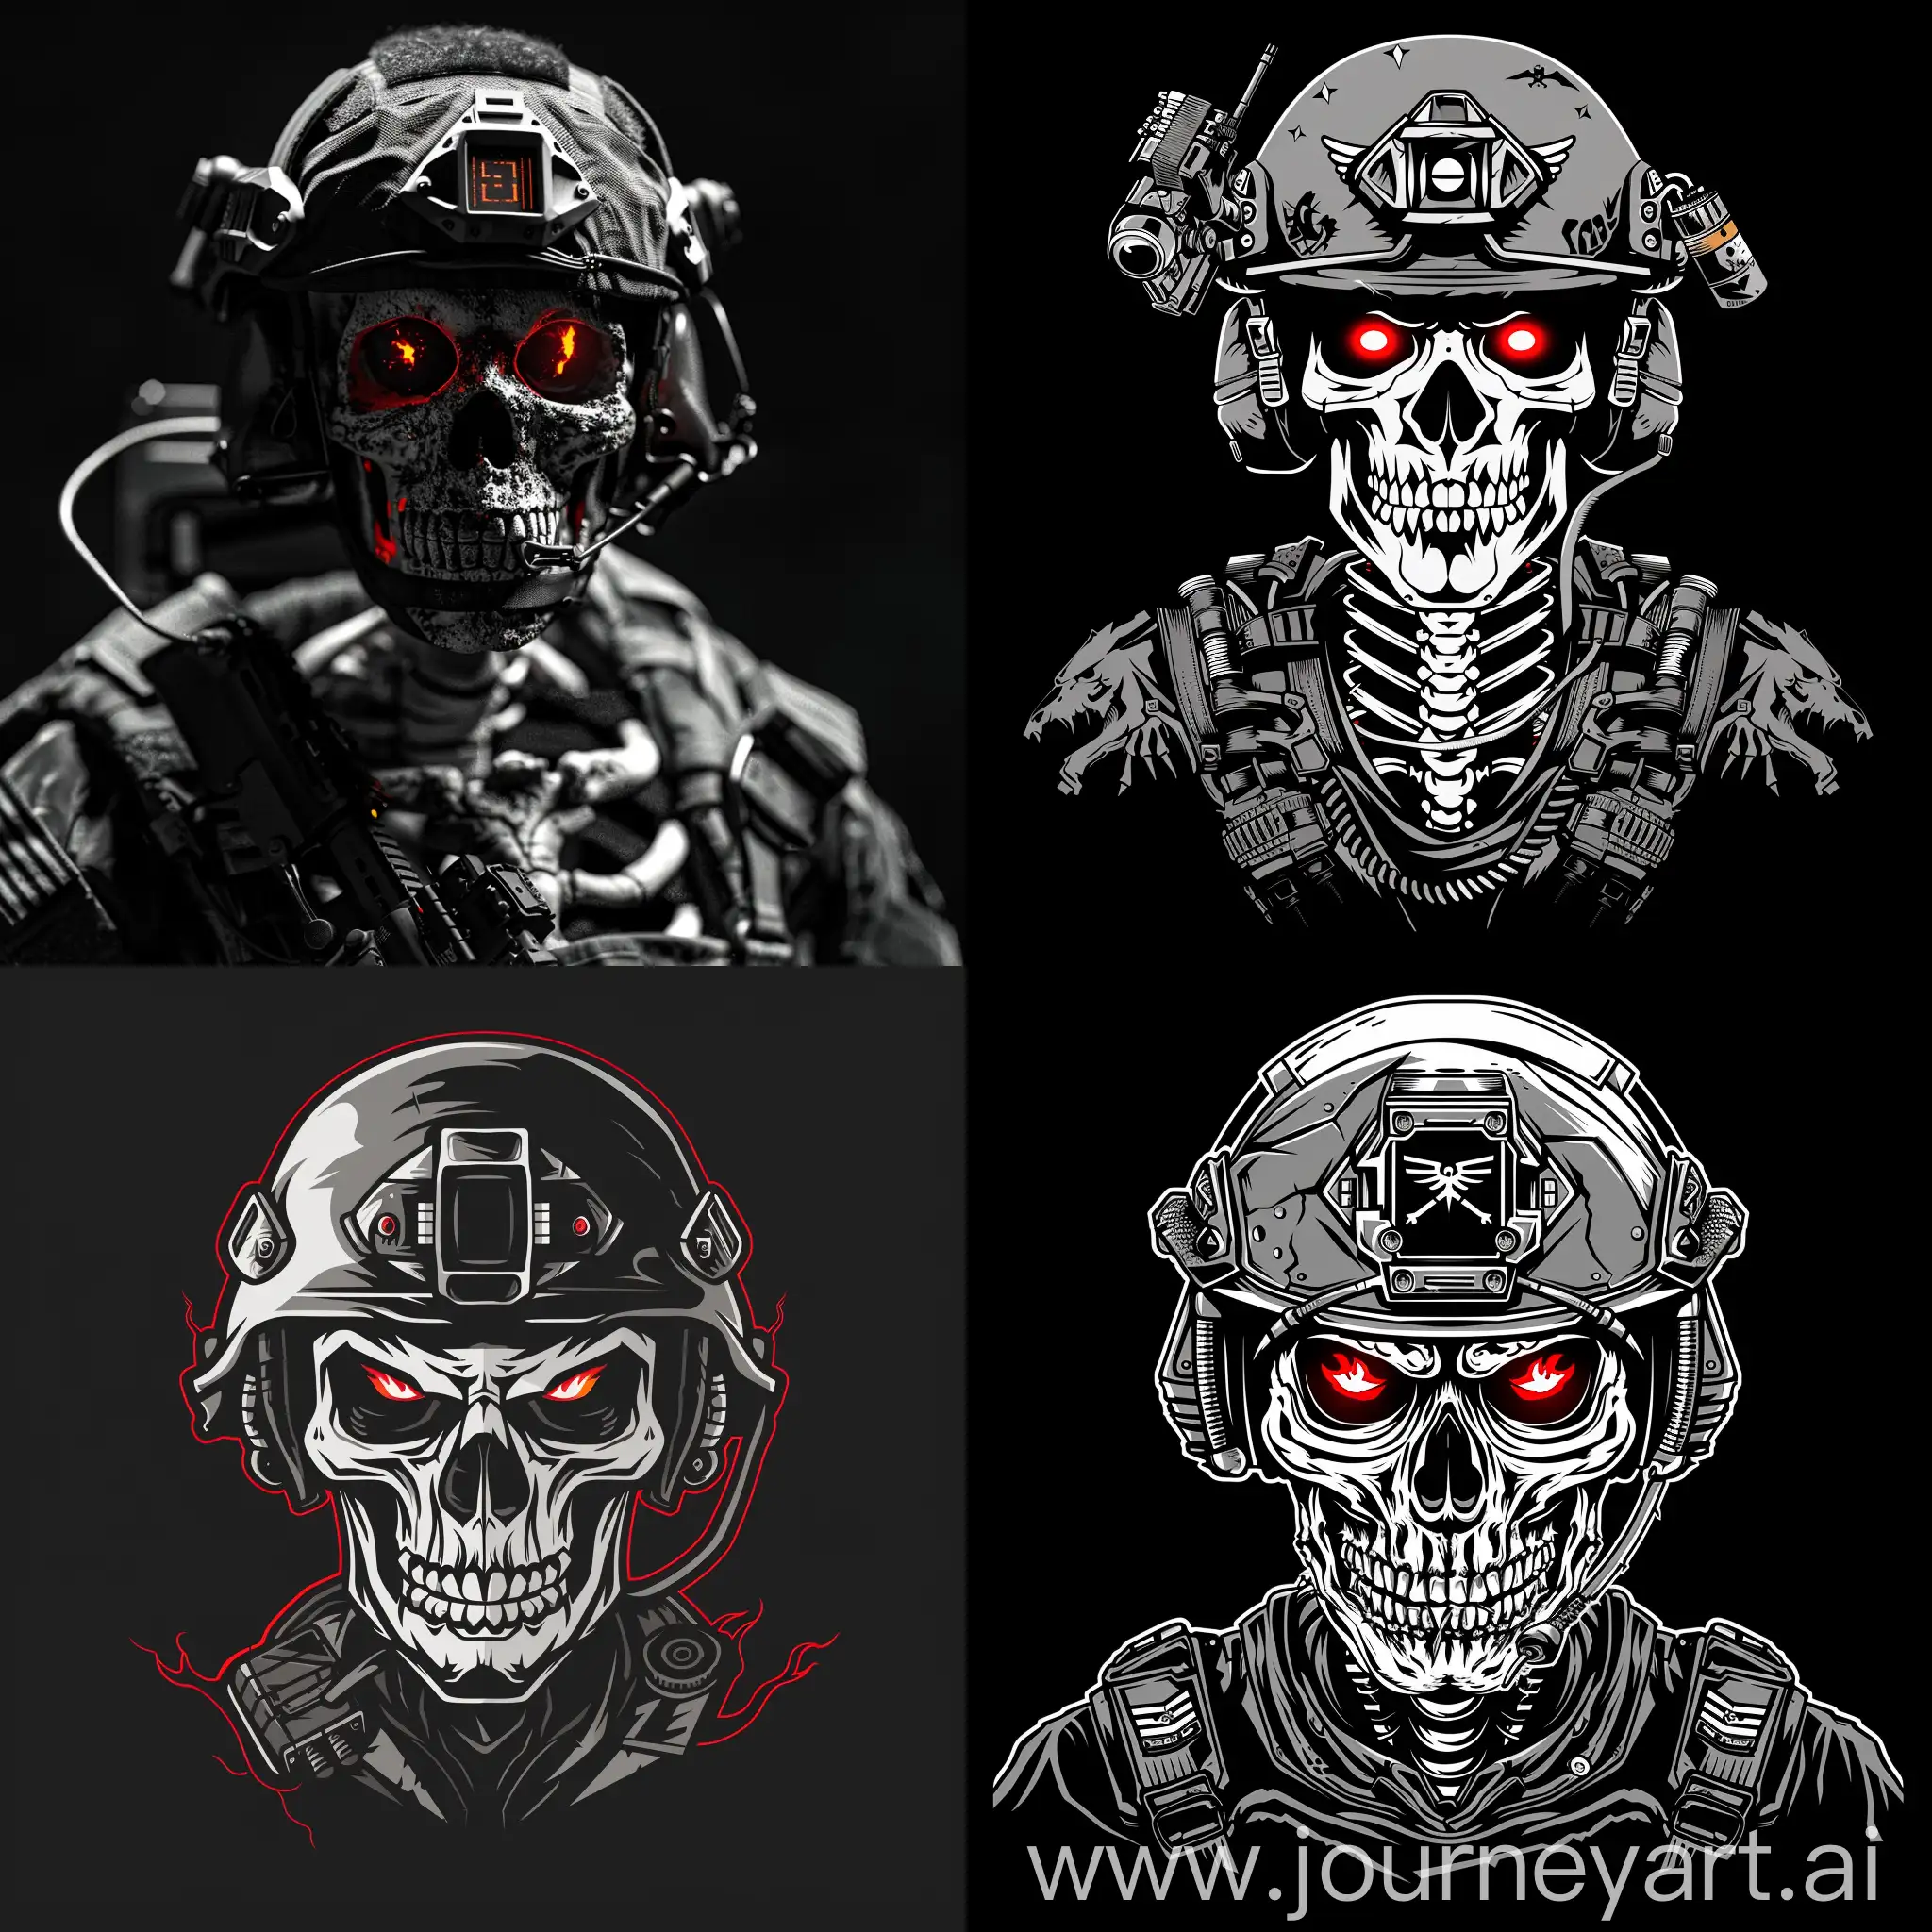 Modern-Military-Undead-Soldiers-with-Burning-Red-Eyes-on-Black-Background